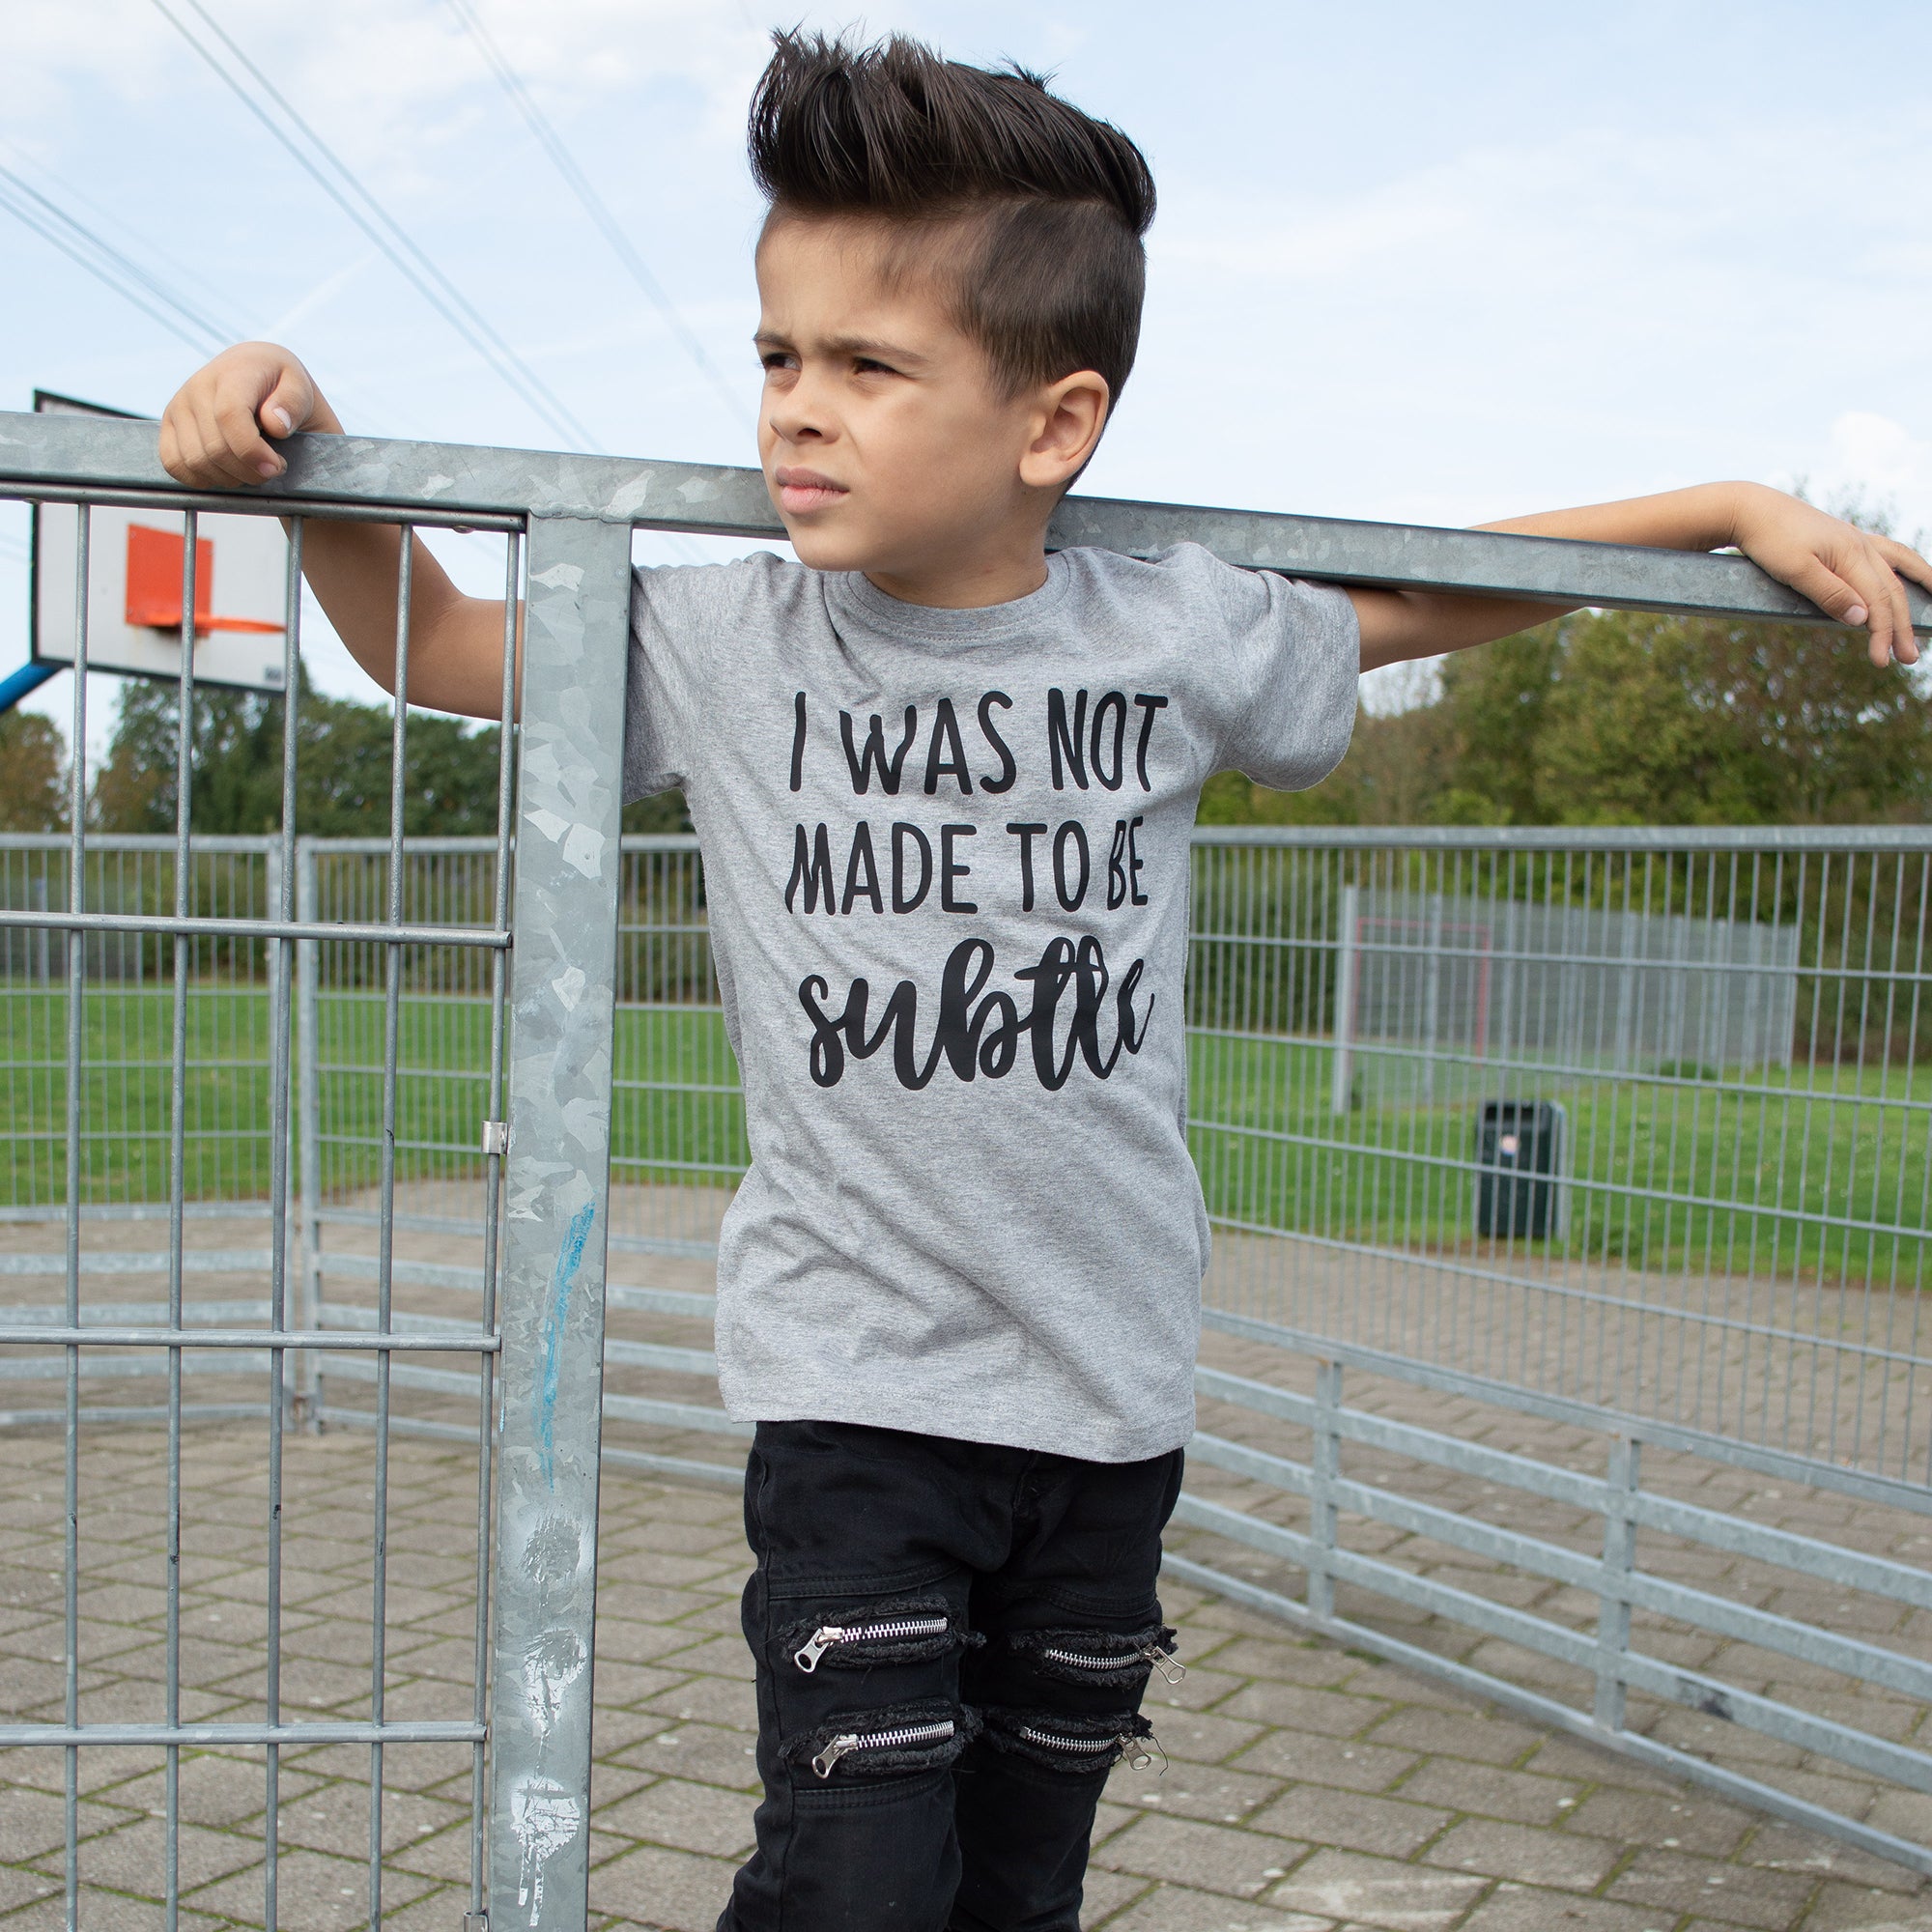 'I was not made to be subtle' kids shortsleeve shirt